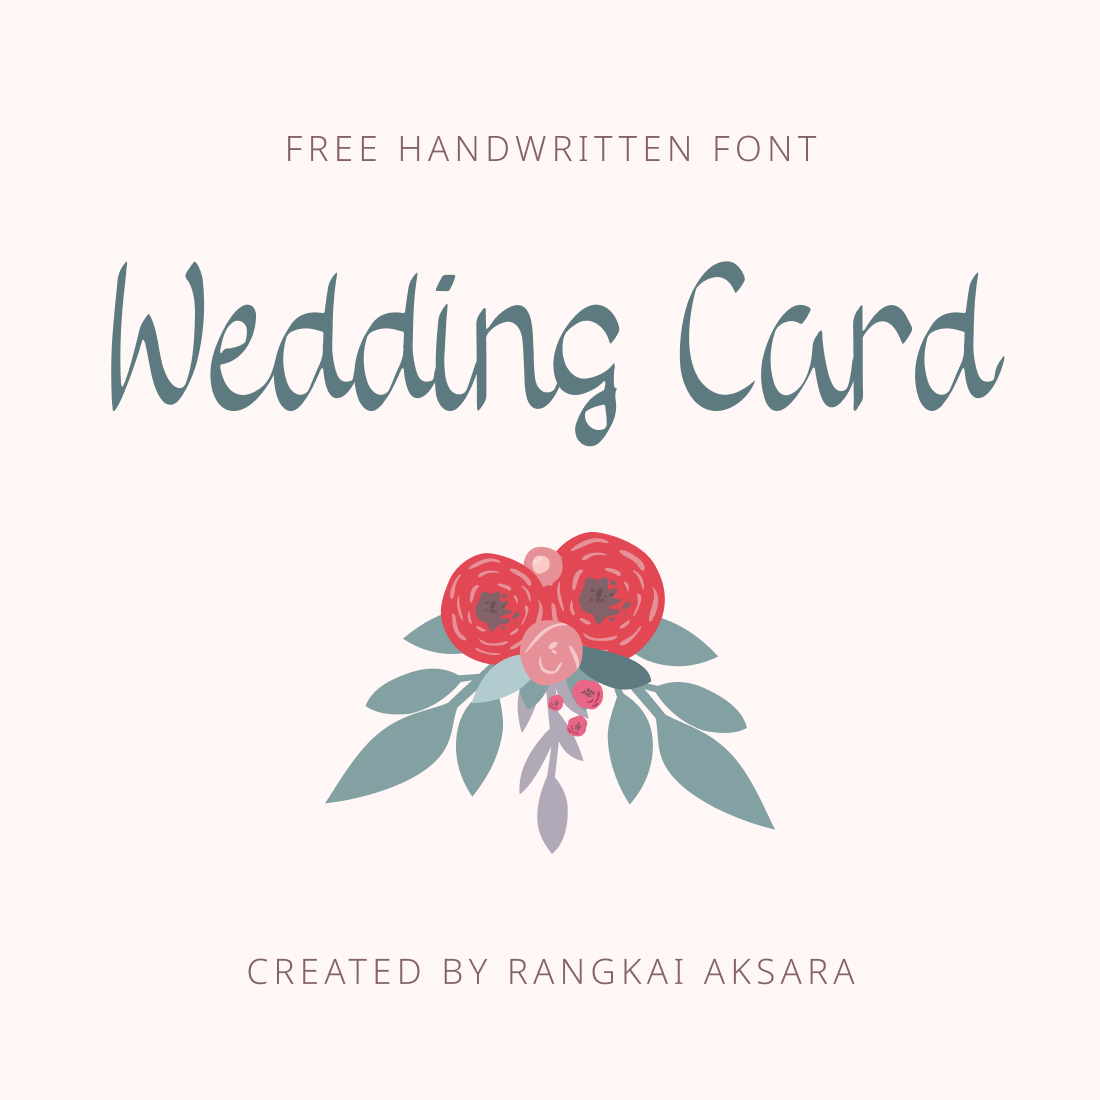 Wedding Card Free Font main cover.